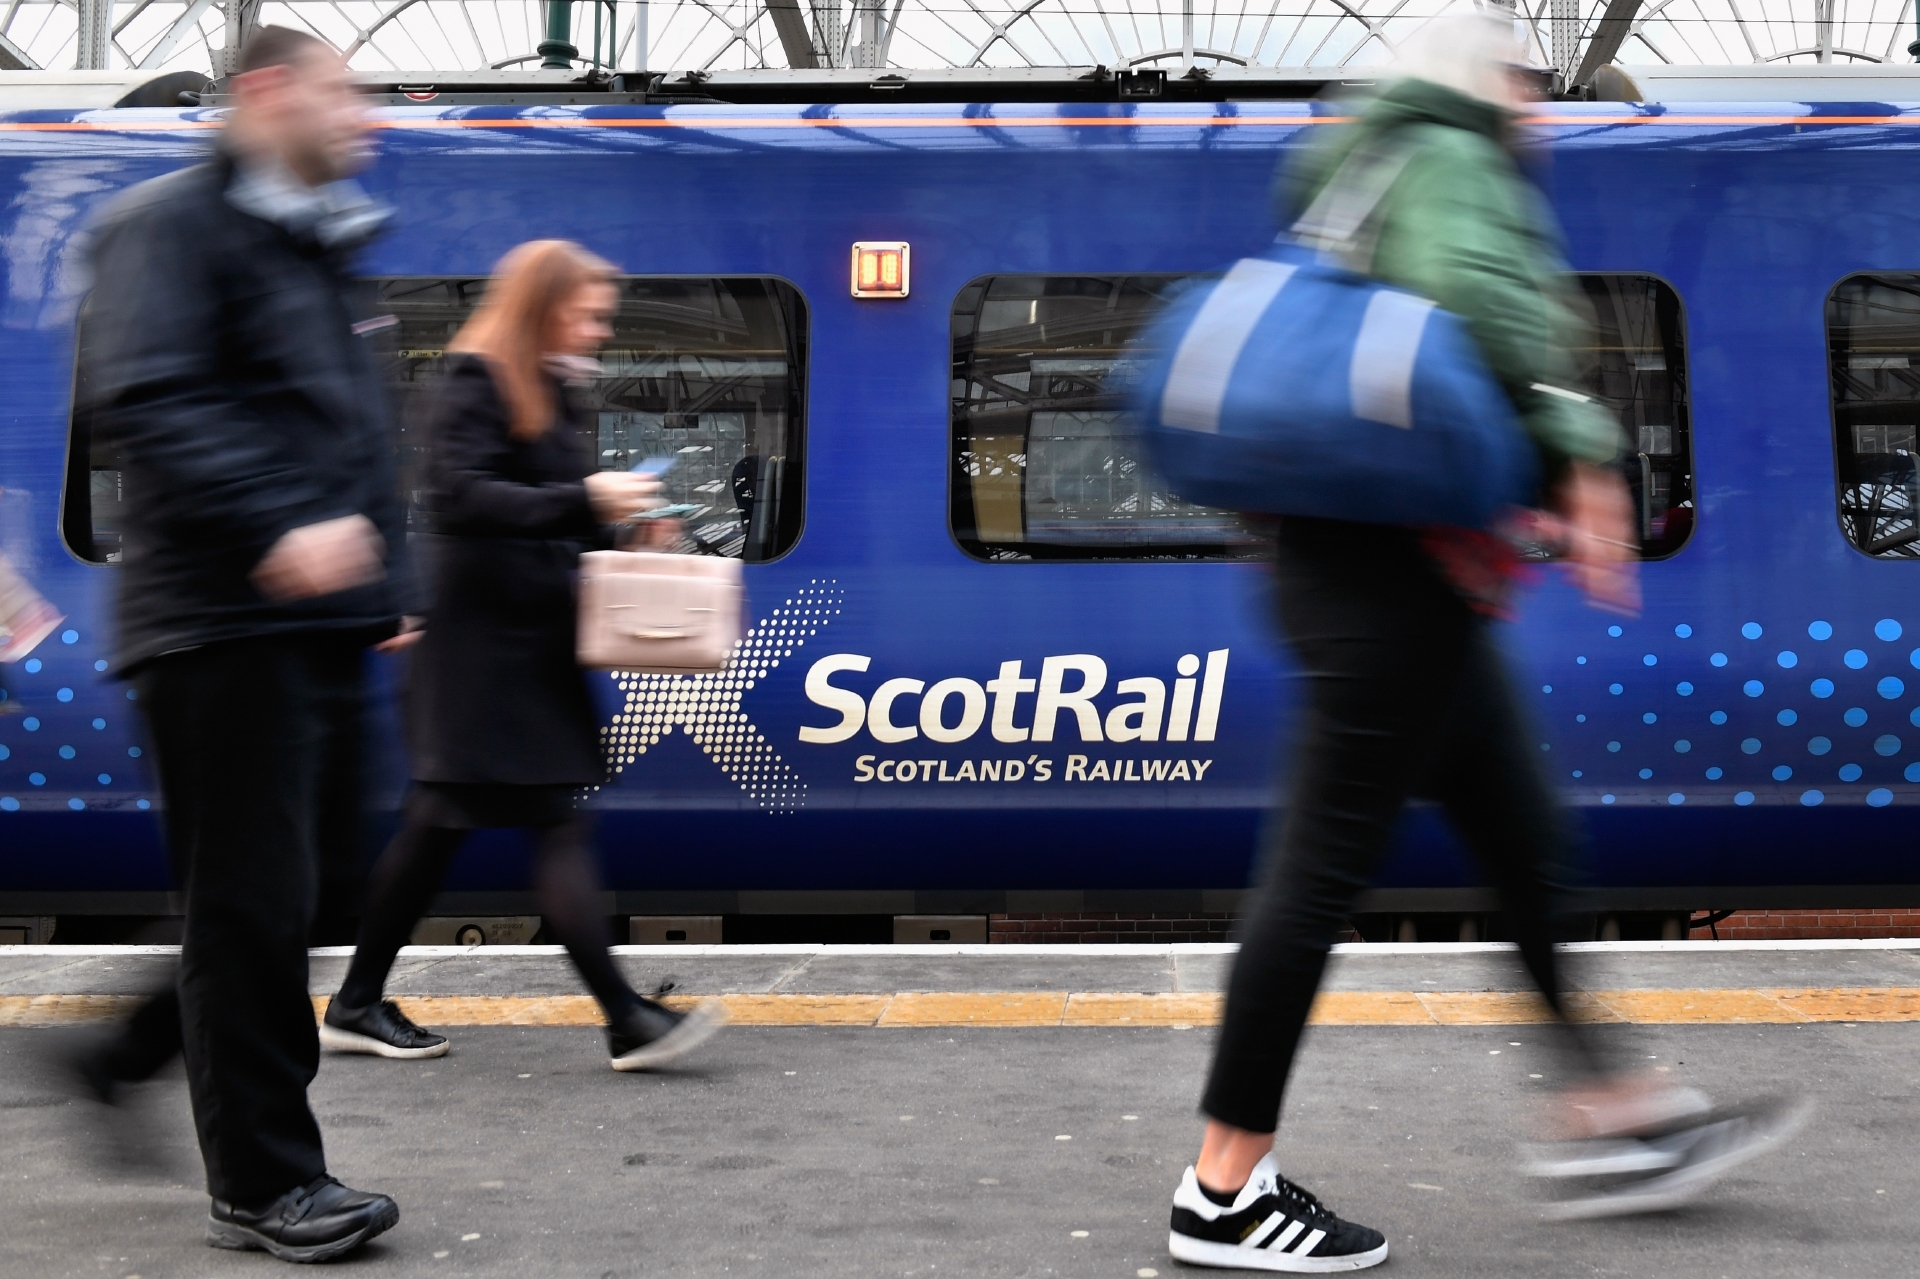 ScotRail has said 'split-ticketing' can be used provided all the tickets are valid for the journey.